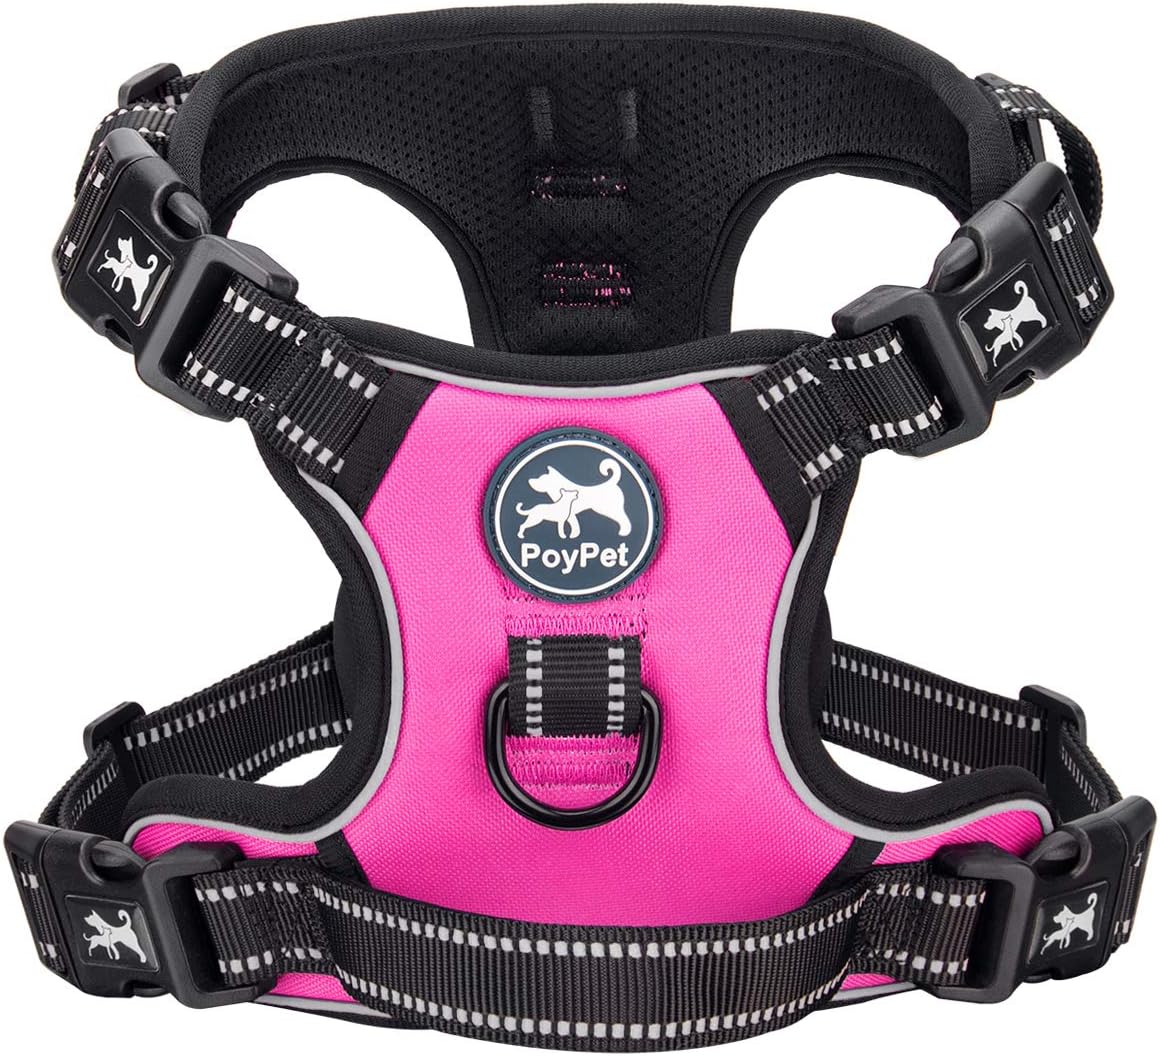 PoyPet 2019 Upgraded No Pull Dog Harness with 4 Snap Buckles, 3M Reflective with Front  Back 2 Leash Hooks and an Easy Control Handle [NO Need Go Over Dog’s Head] (Pink,L)